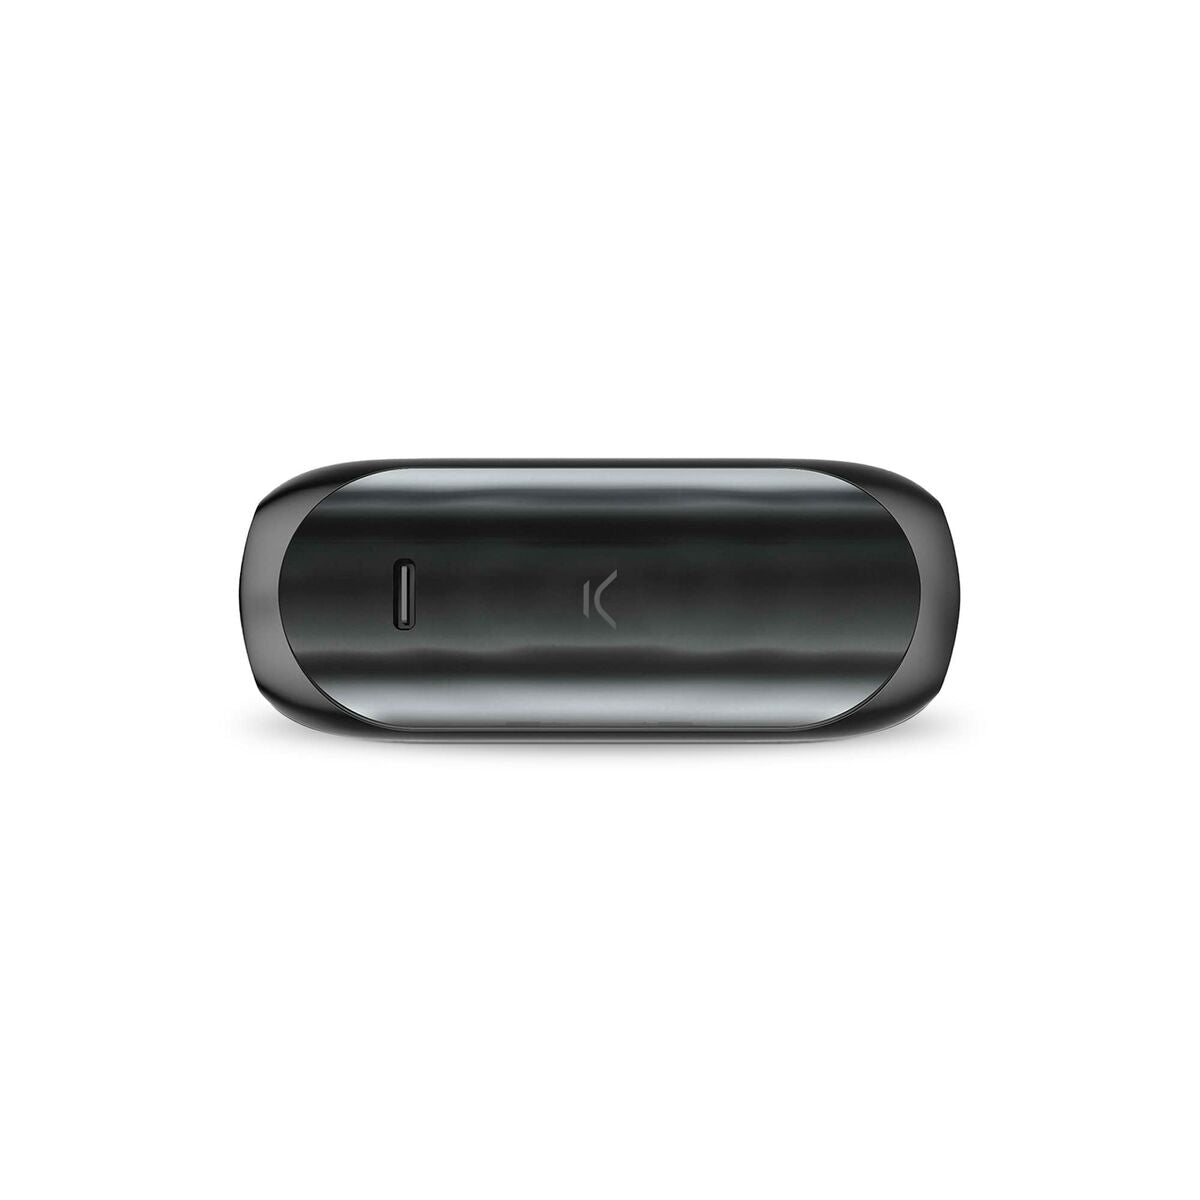 Wireless Headphones KSIX HALLEY, KSIX, Electronics, Mobile communication and accessories, wireless-headphones-ksix-halley, :Wireless Headphones, Brand_KSIX, category-reference-2609, category-reference-2642, category-reference-2847, category-reference-t-19653, category-reference-t-21312, category-reference-t-4036, category-reference-t-4037, computers / peripherals, Condition_NEW, entertainment, gadget, music, office, Price_20 - 50, telephones & tablets, Teleworking, RiotNook